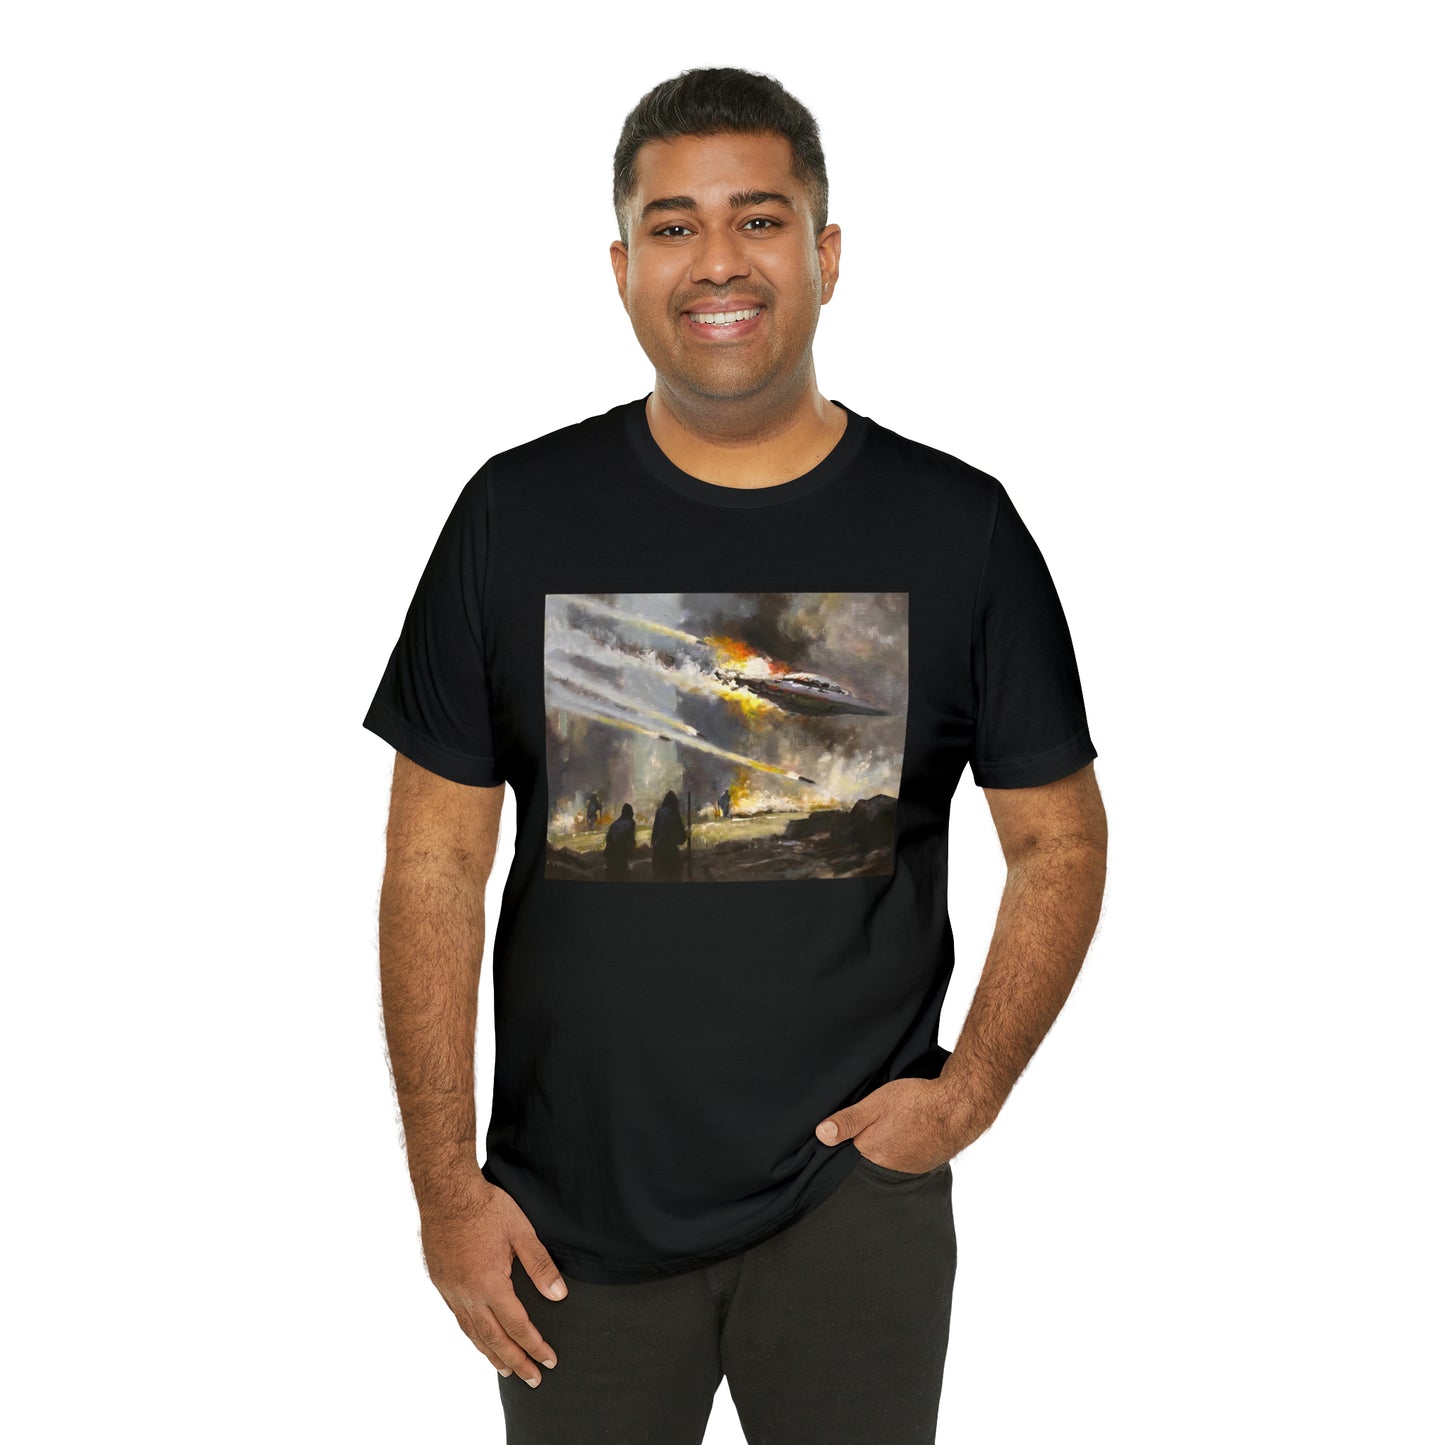 Witnesses to the Crash T-Shirt